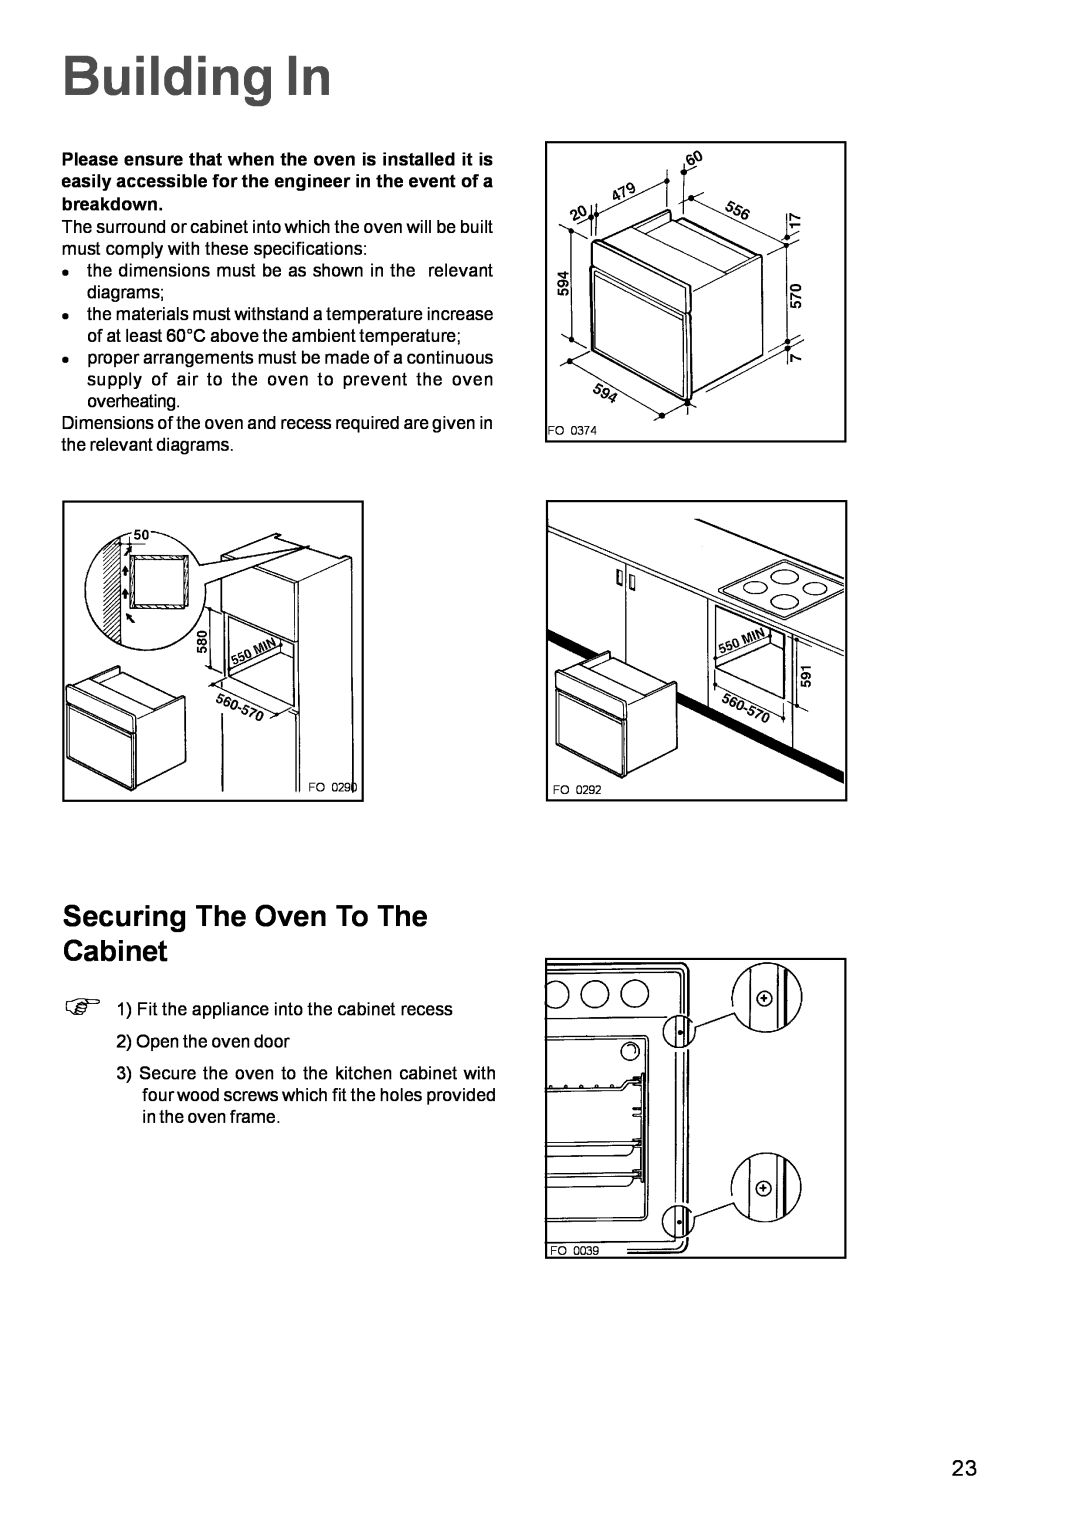 Zanussi ZBM 972 manual Building In, Securing The Oven To The Cabinet 